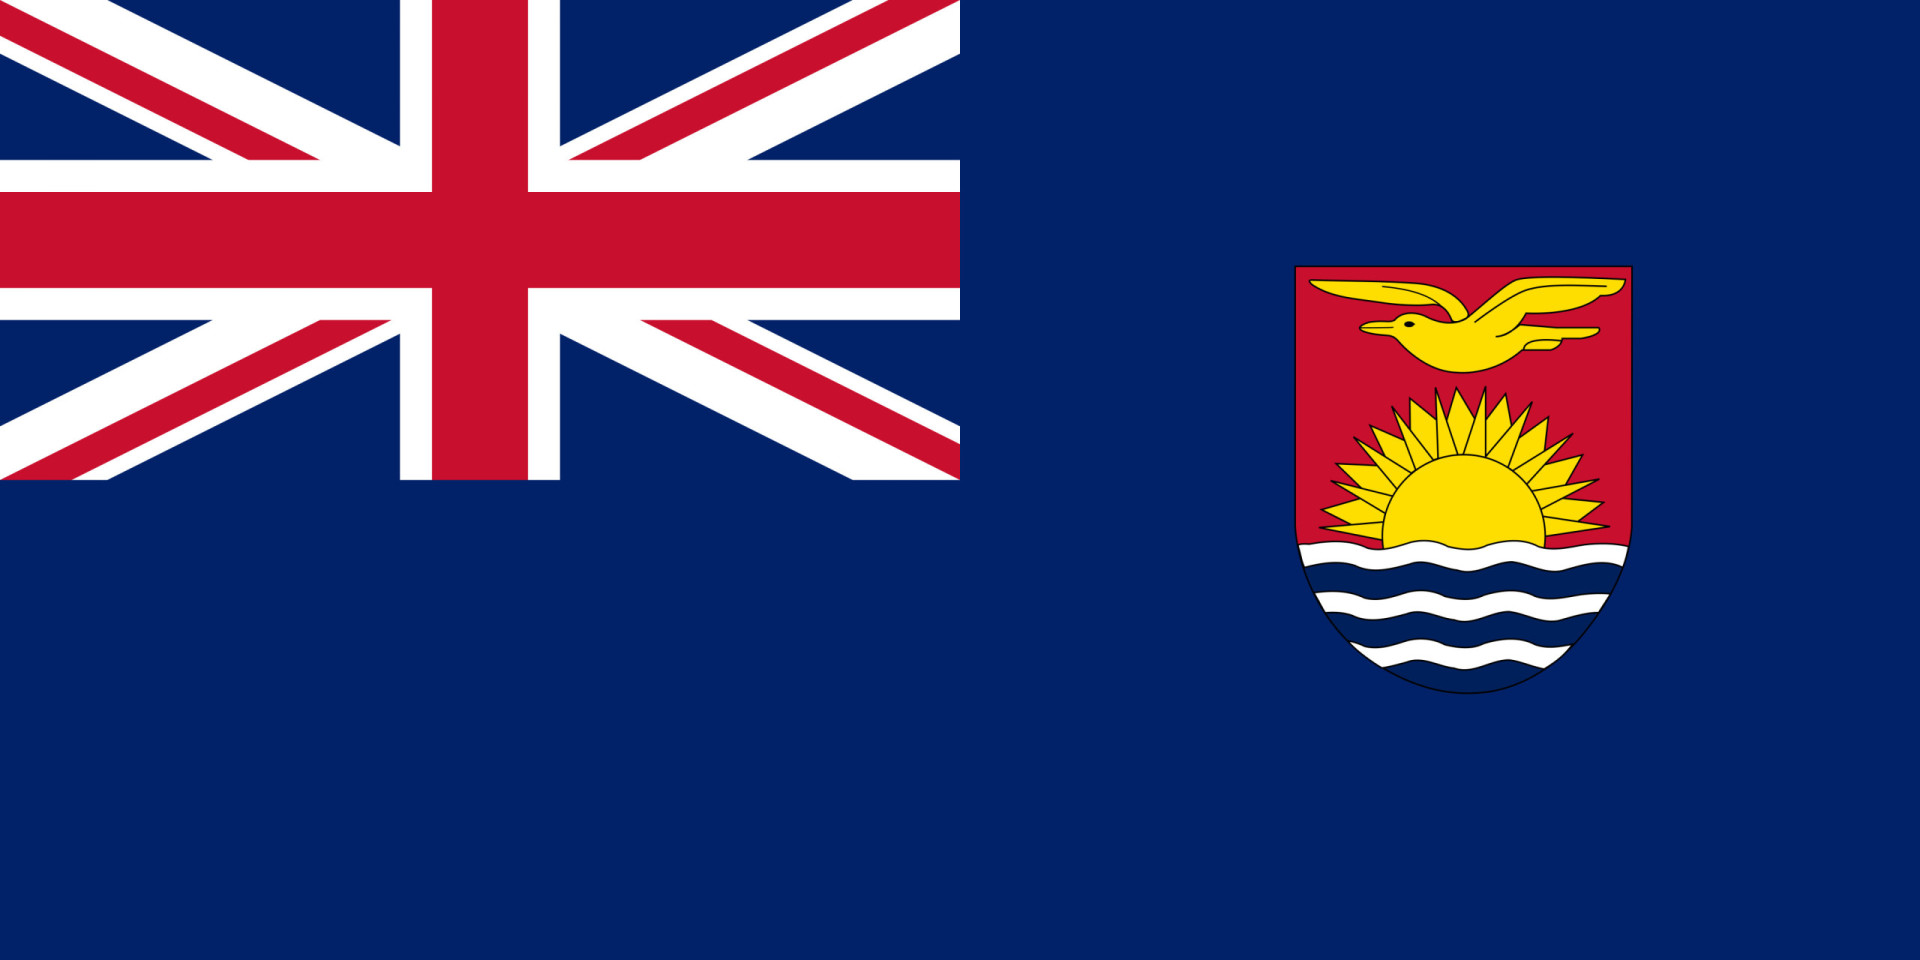 <p>Kiribati used to be a colony of the United Kingdom before it gained independence on July 12, 1979. Before independence, it was known as the Gilbert and Ellice Islands Colony, the flag of which is pictured here.</p><p>You may also like:<a href="https://www.starsinsider.com/n/135007?utm_source=msn.com&utm_medium=display&utm_campaign=referral_description&utm_content=717375en-us"> The real impact of alcohol in your body</a></p>